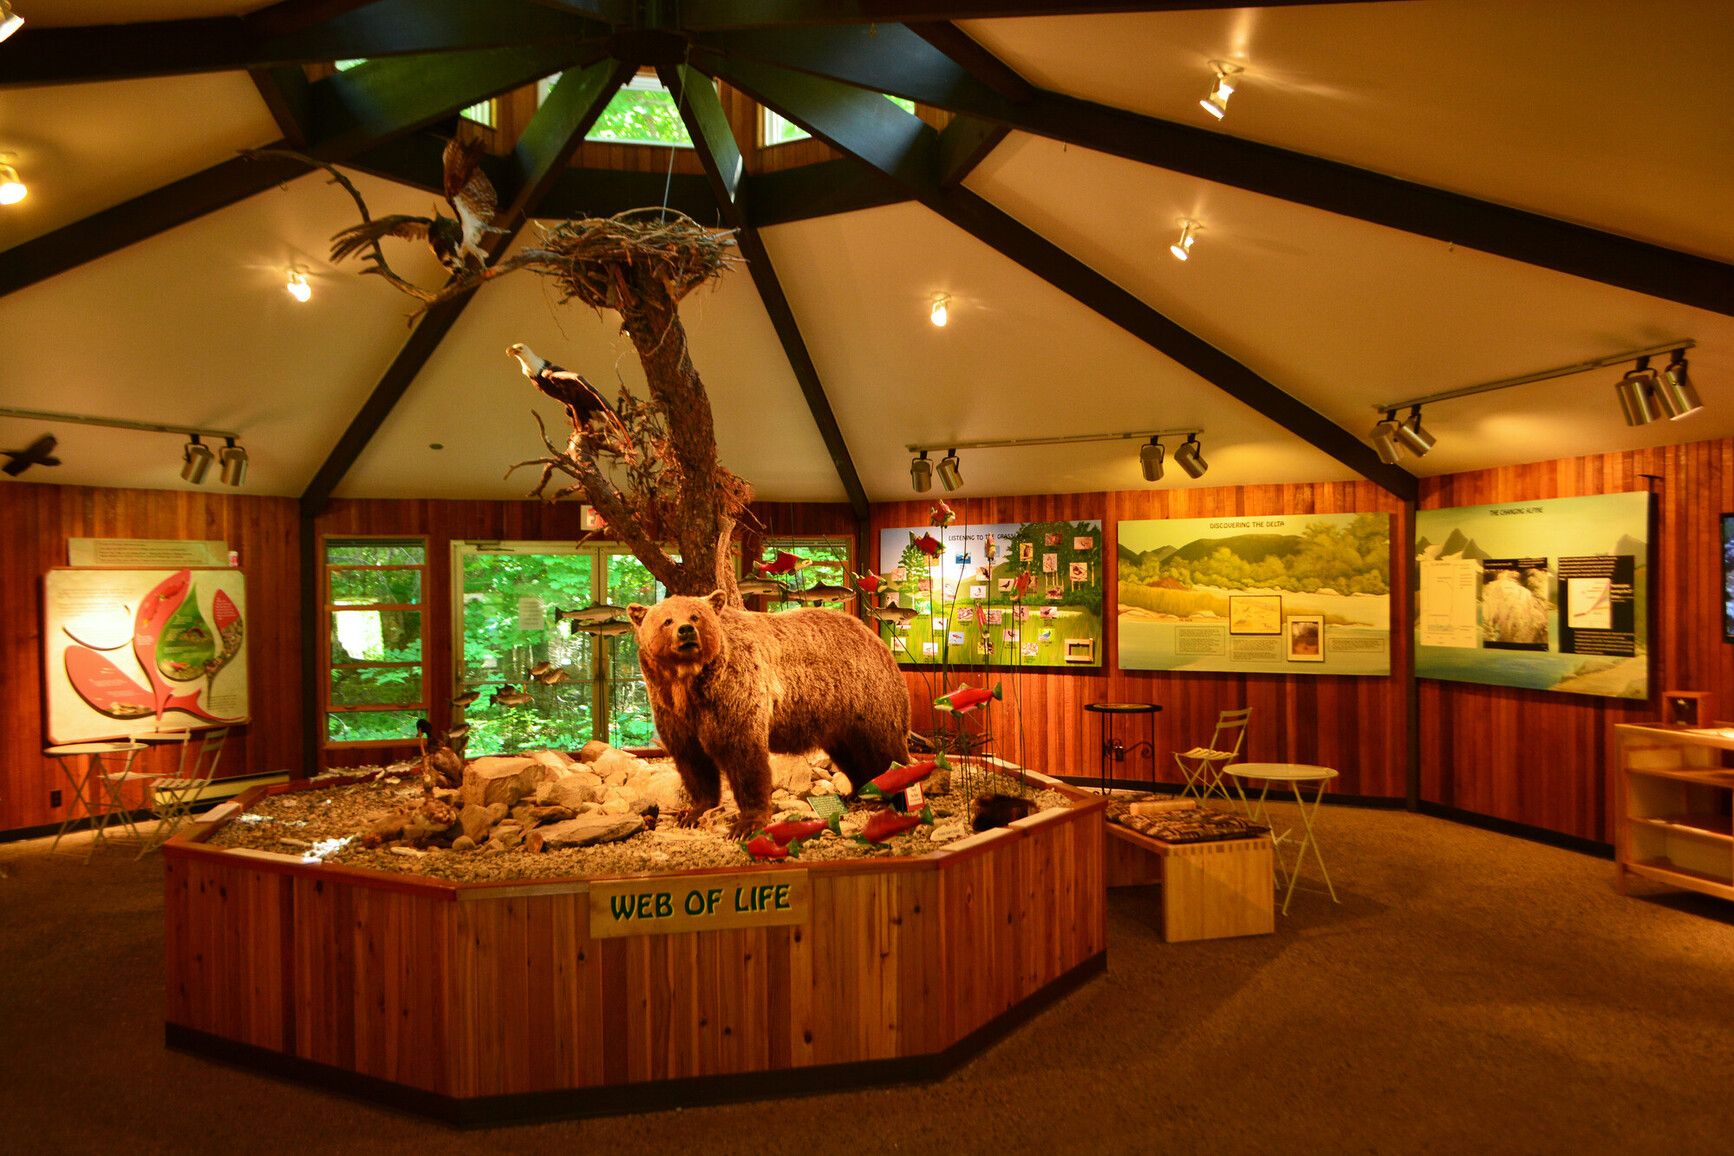 Visit Kokanee Creek Park's visitor center and see a majestic taxidermized bear, explore wildlife infographics, and be inspired by nature. Explore, learn, and be inspired.